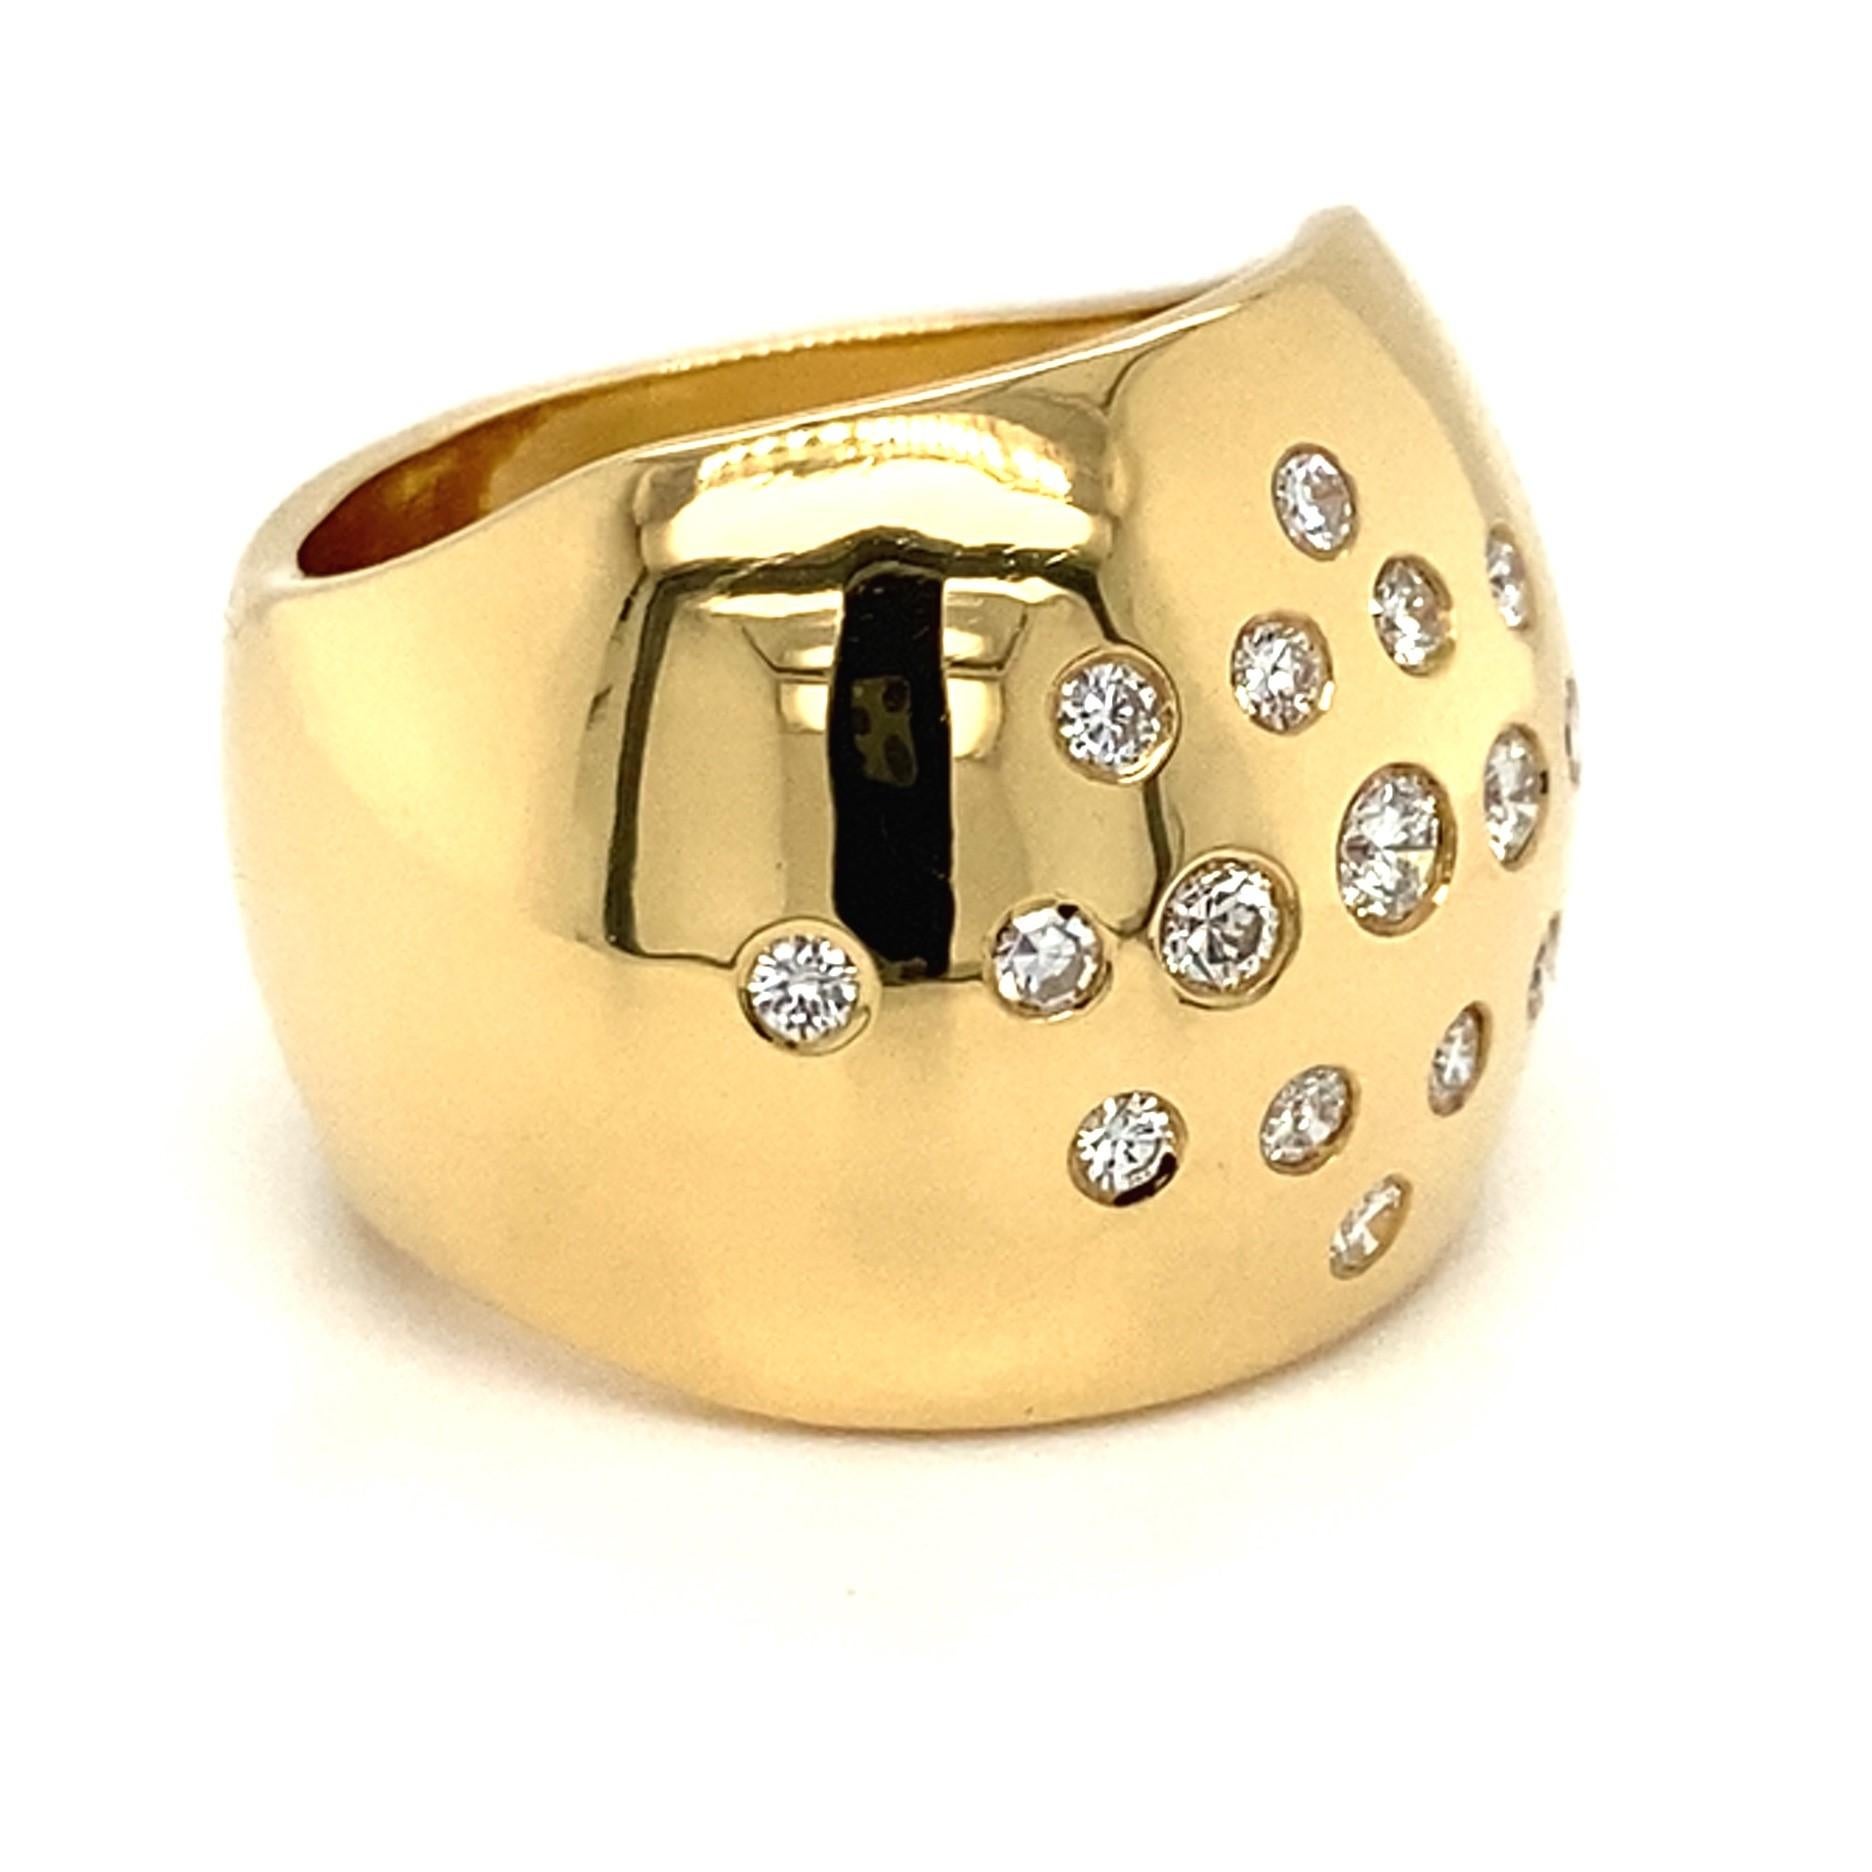 18 karat yellow gold diamond ring.
Statement ring set with 15 brilliant-cut diamonds and 2 single-cut diamonds totalling circa 0.7 carats. It is light, comfortable and easy to wear day and night.

Quality of the diamonds: colour range G - H, clarity